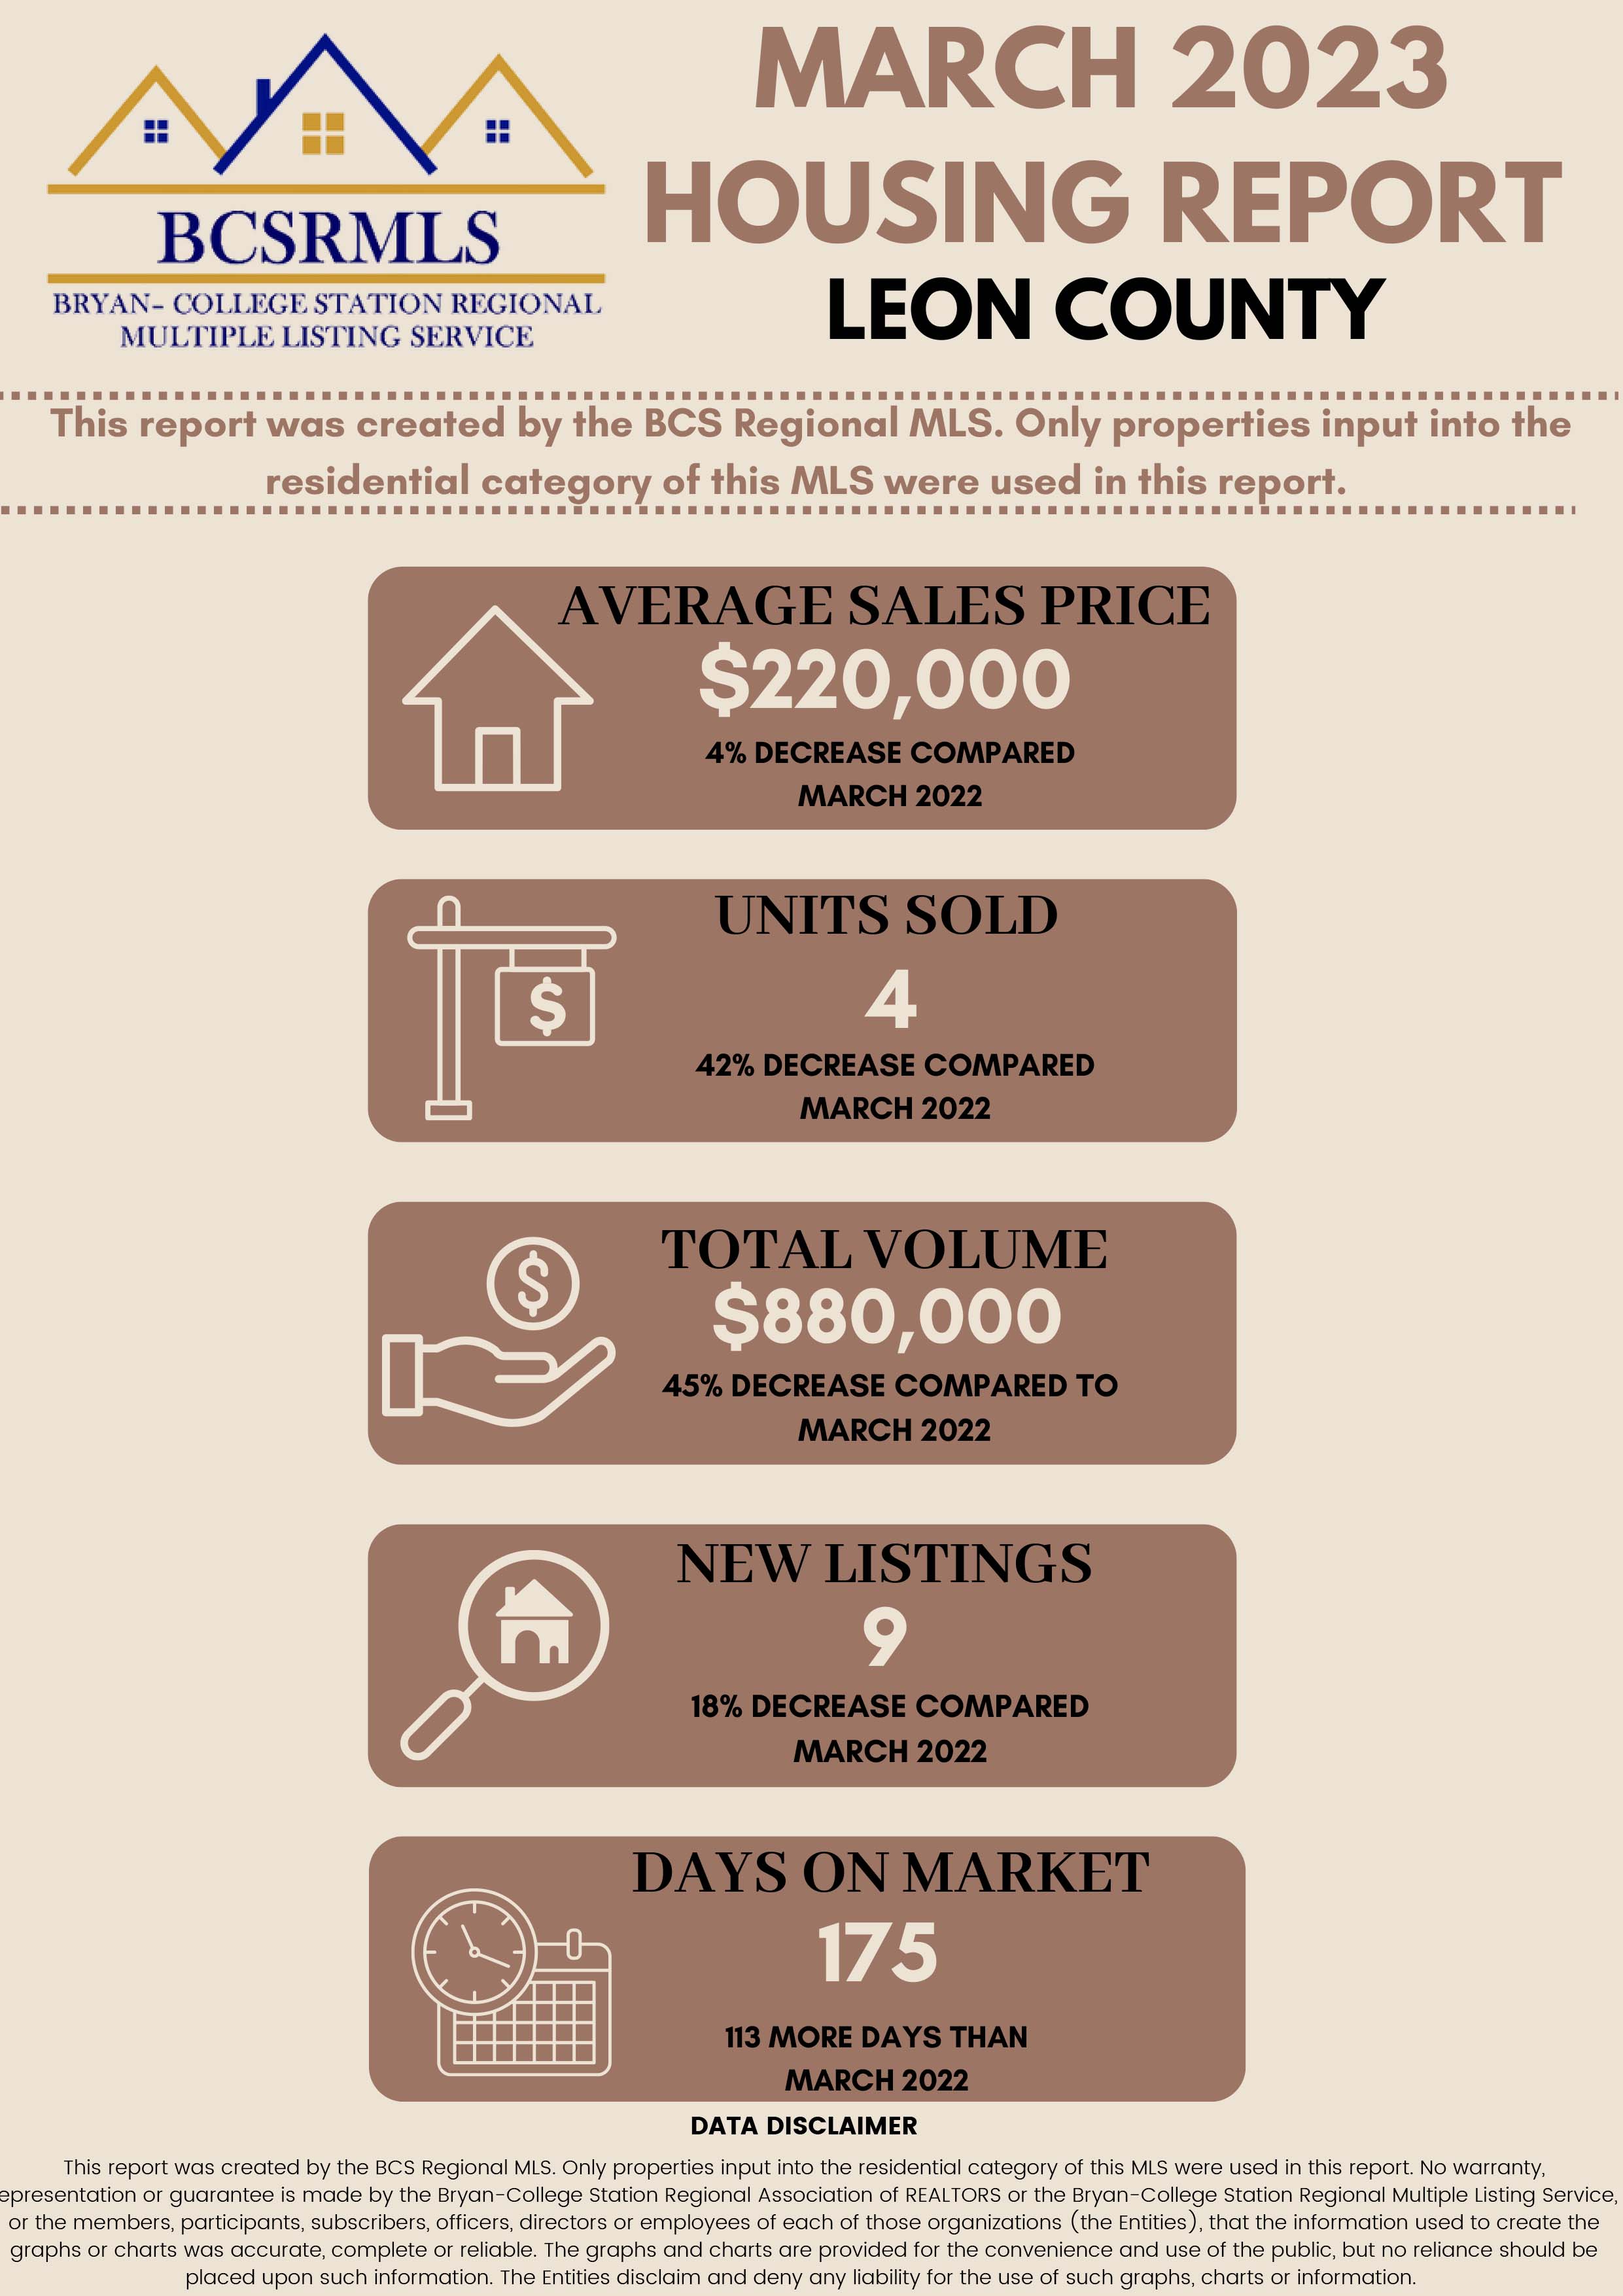 Residential Home Sale Report March 2023 - Leon